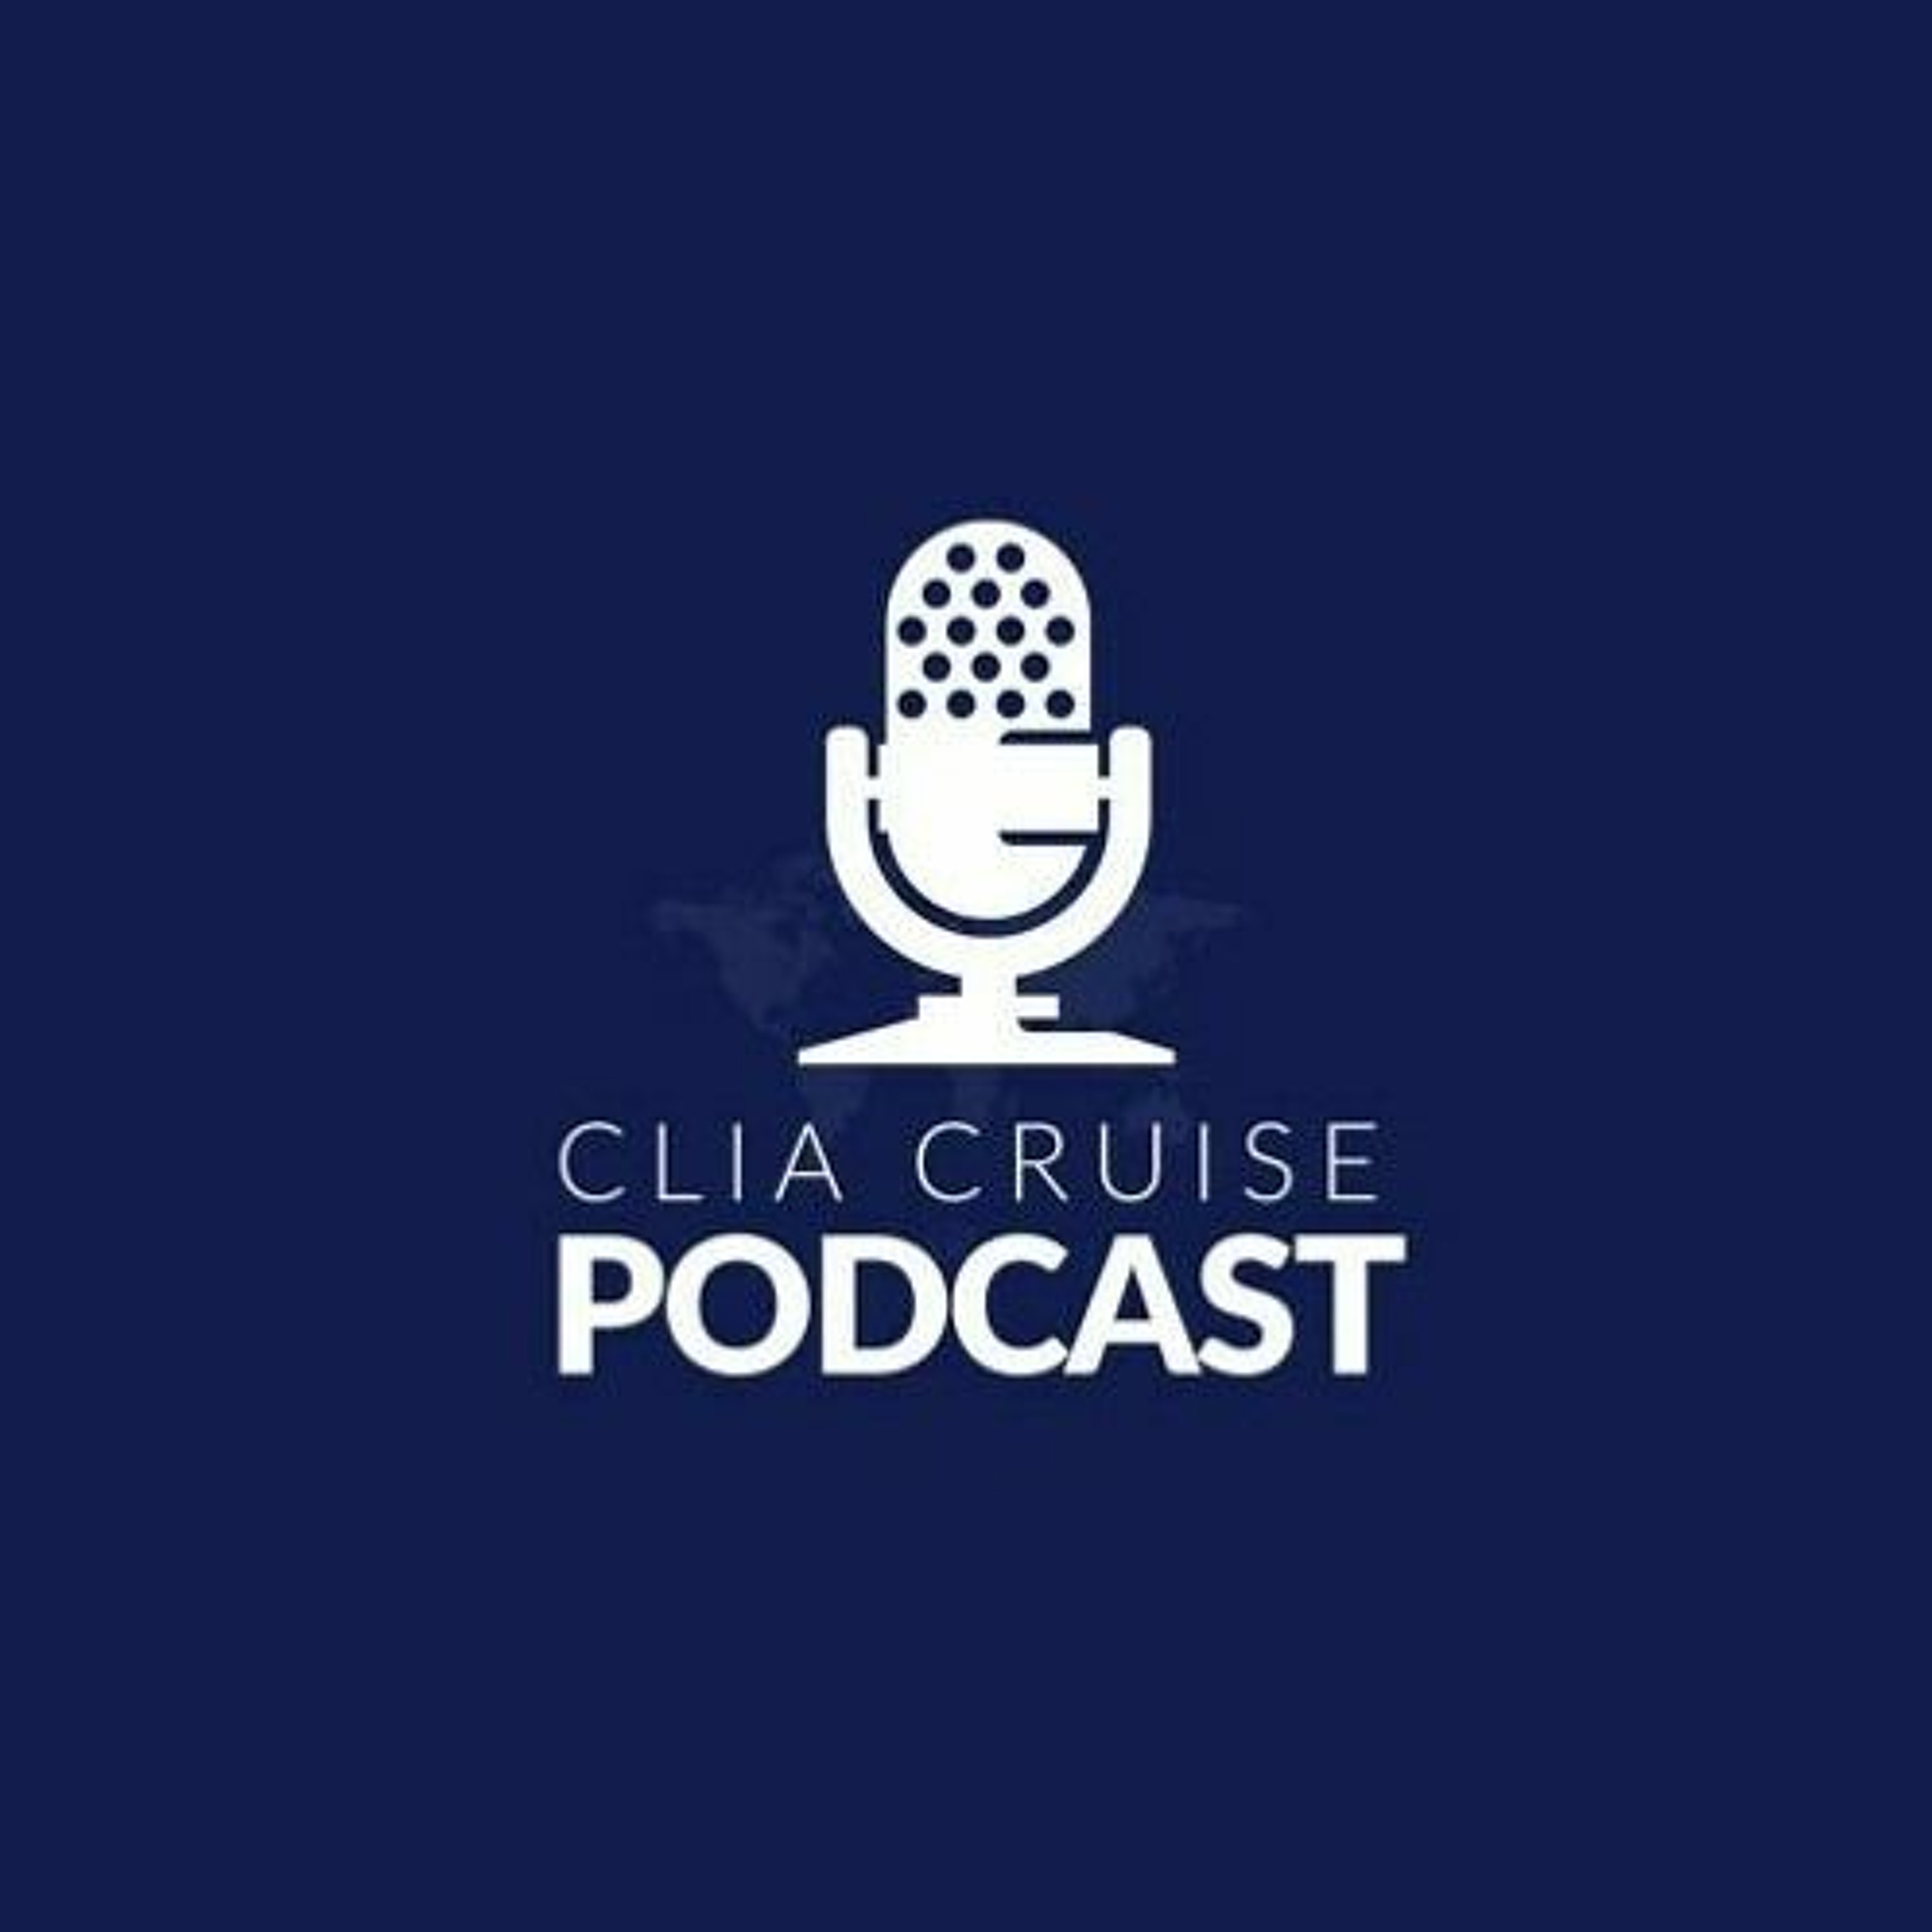 Episode 114 - Andy Harmer talks to Antonio Paradiso from MSC Cruises